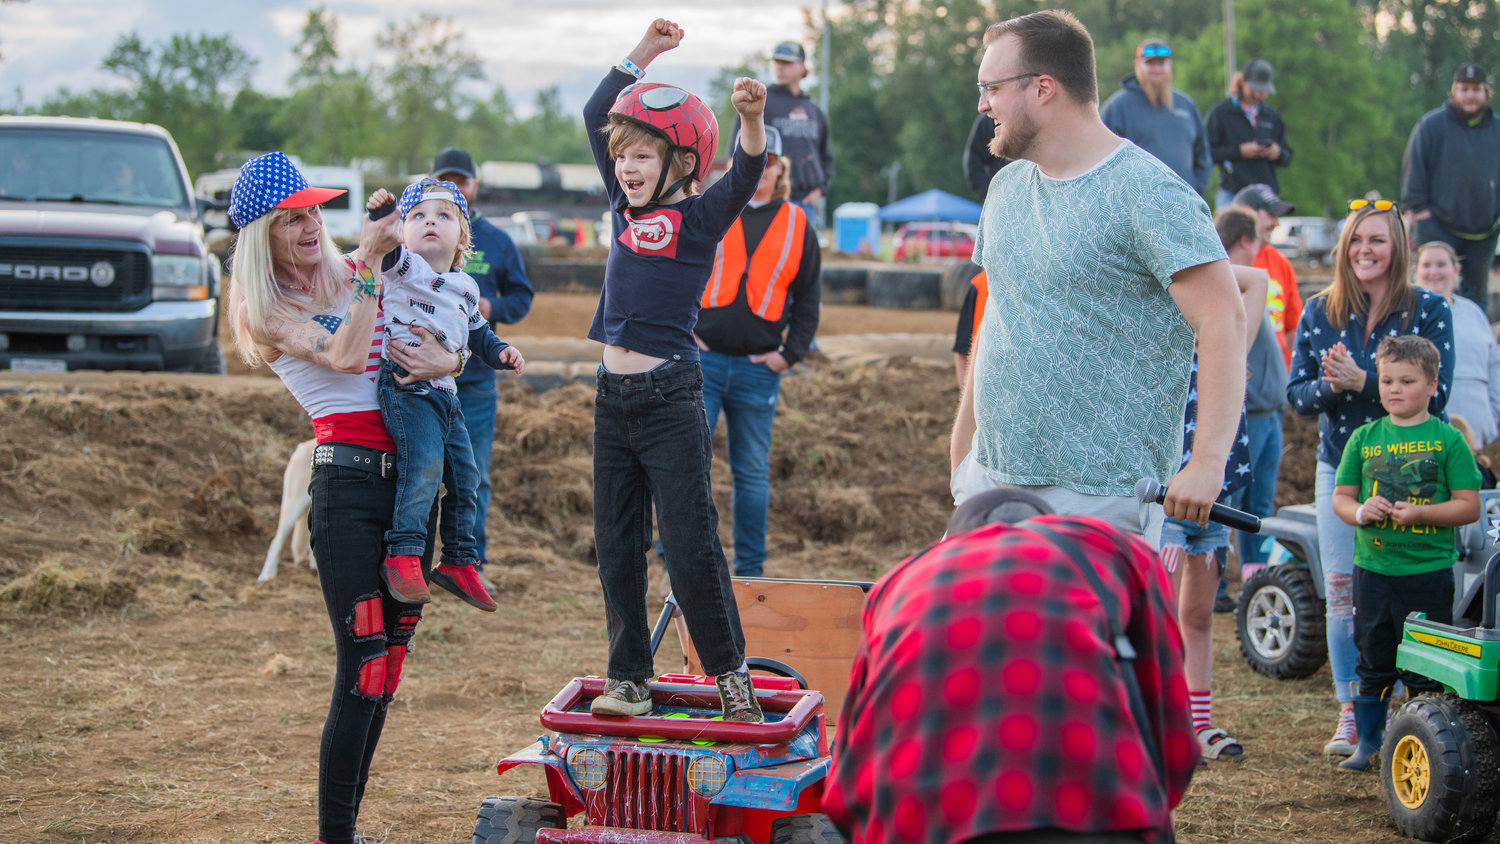 William Arnhold, 7, of Tacoma, cheers after winning the first-ever power wheels demolition derby for kids at the Southwest Washington Fairgrounds Sunday night during Summerfest celebrations.